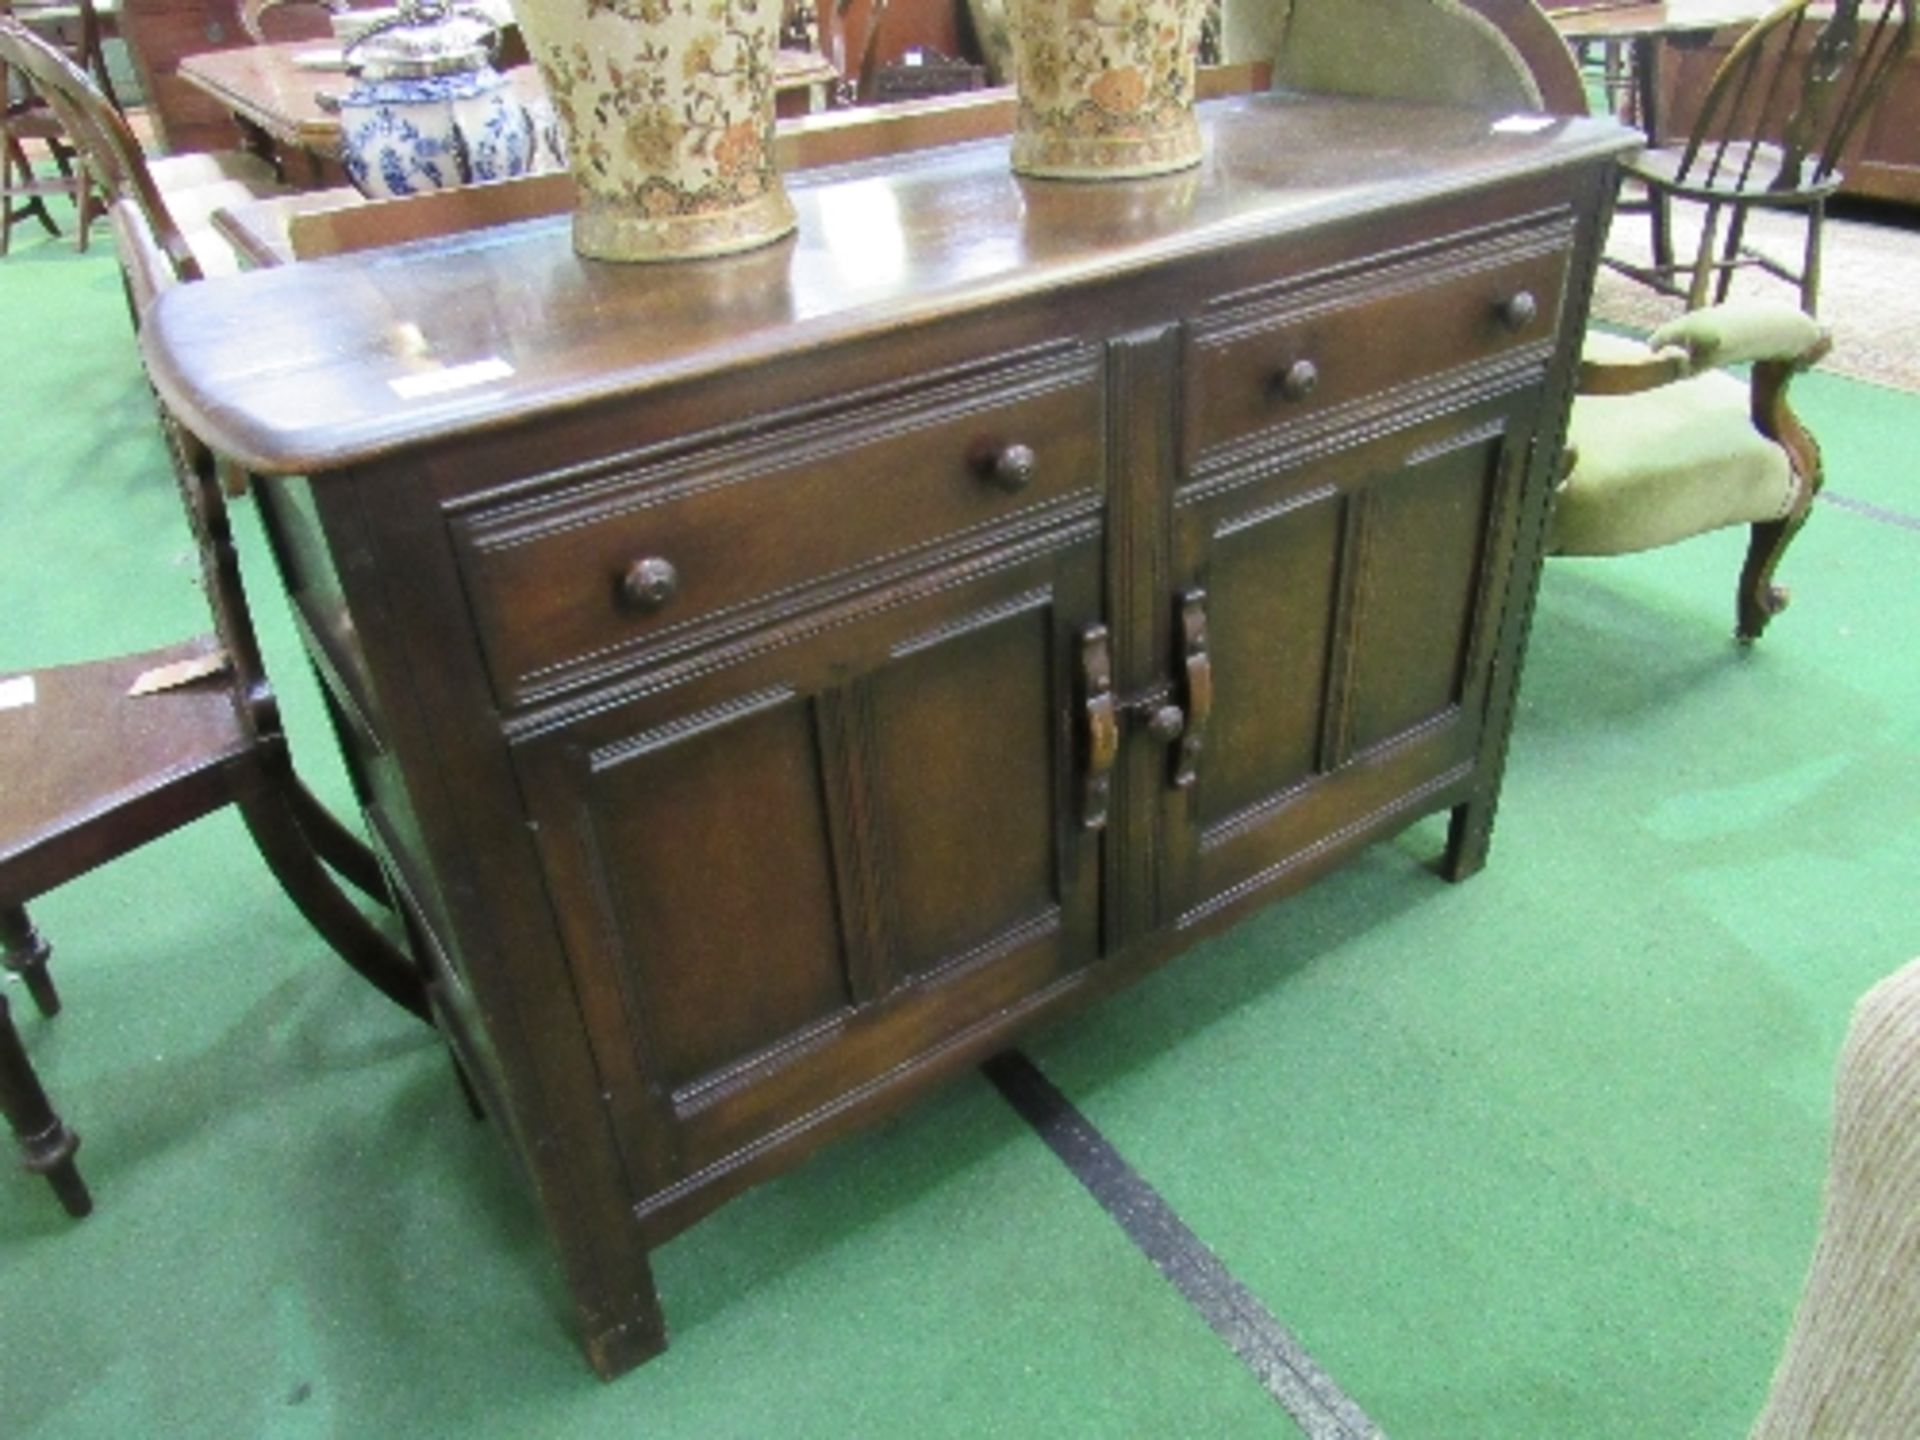 Ercol-style sideboard, 202cms x 45cms x 84cms. Estimate £30-50 - Image 2 of 4